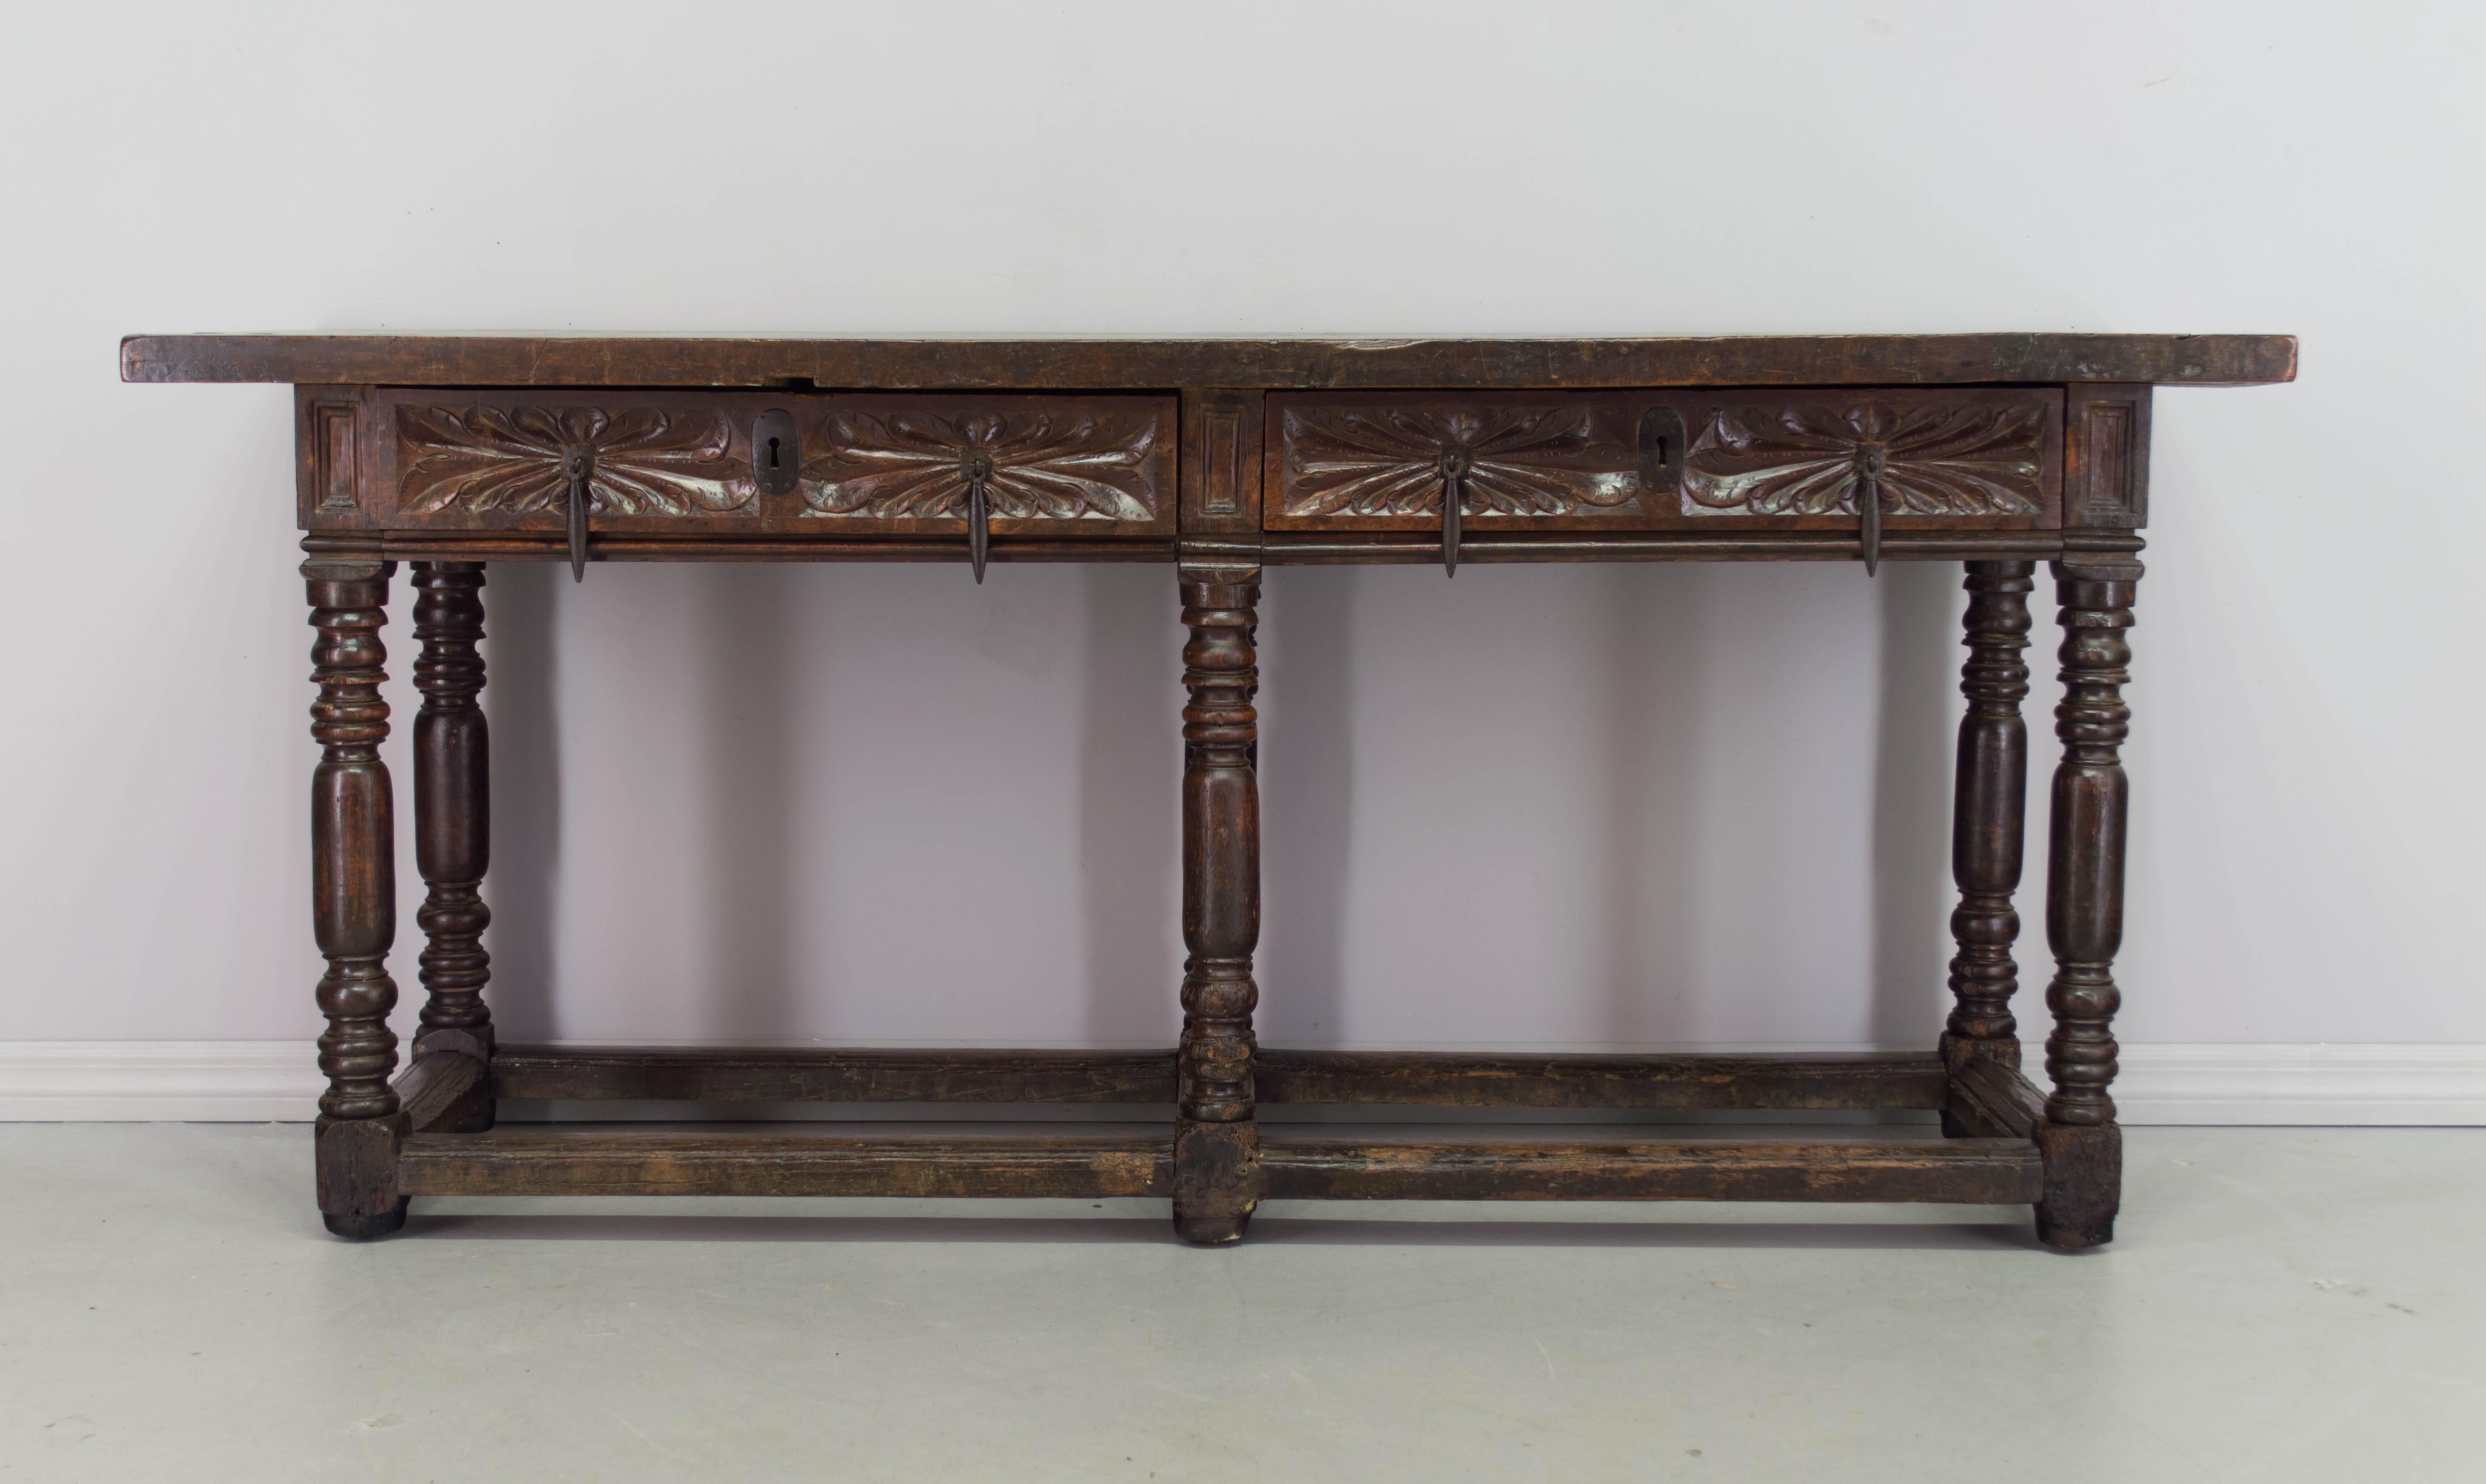 18th century Spanish Baroque console or center table made of solid walnut with pegged construction. Two dovetailed drawers with original iron pulls. Top is made form one 1-1/2